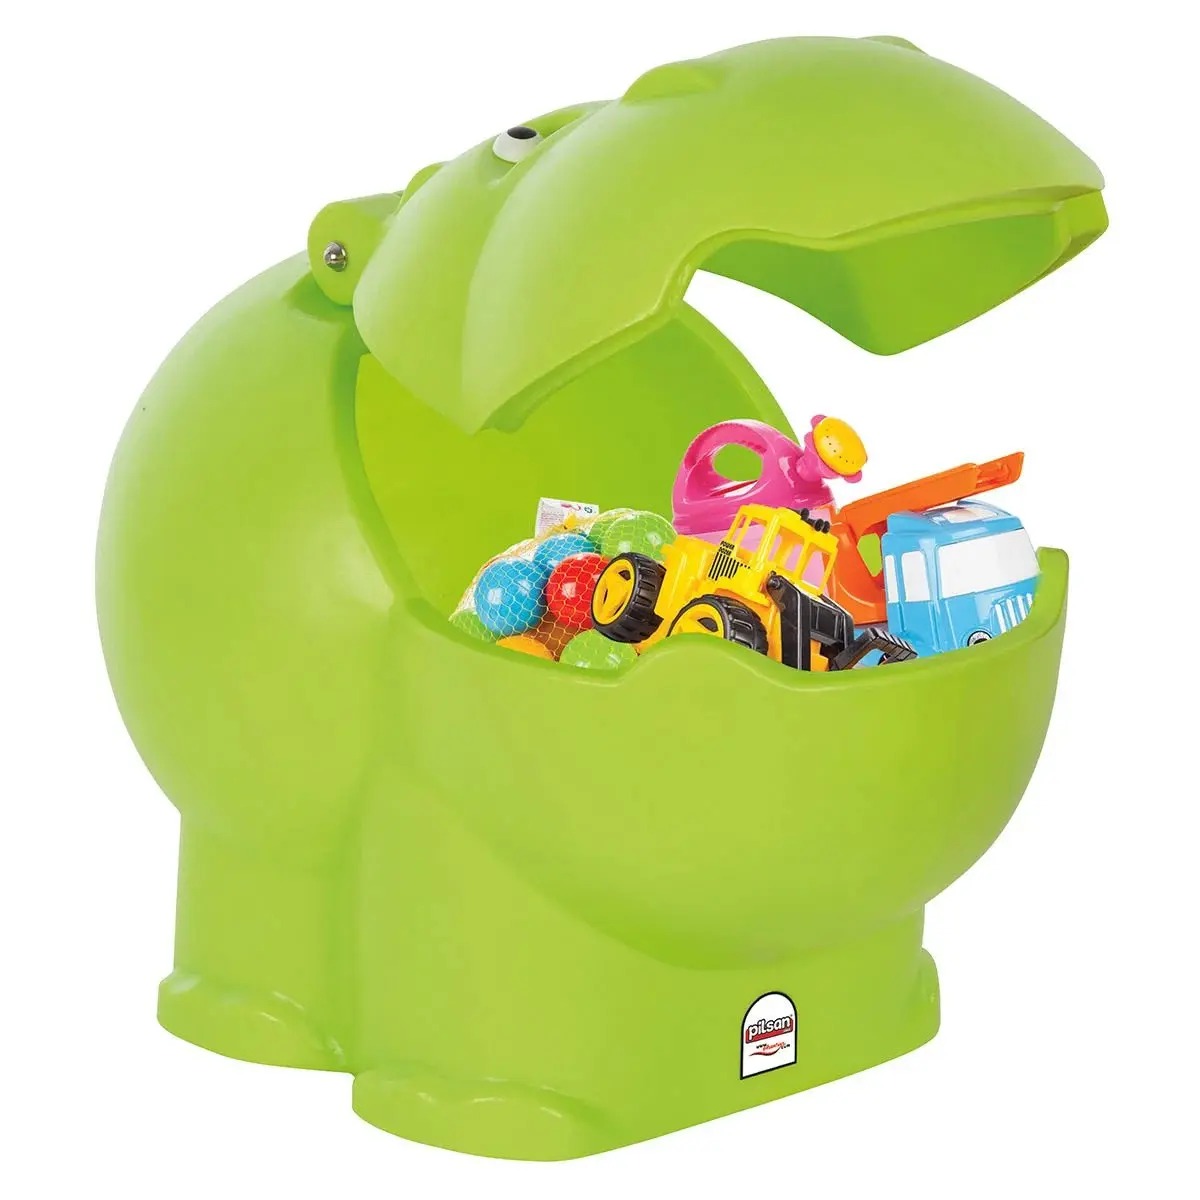 Wholesale Hippo Toy Storage Box 48 lt Play House Organizer Four Wheel Basket Box Movable Toys Container Toys for Kids